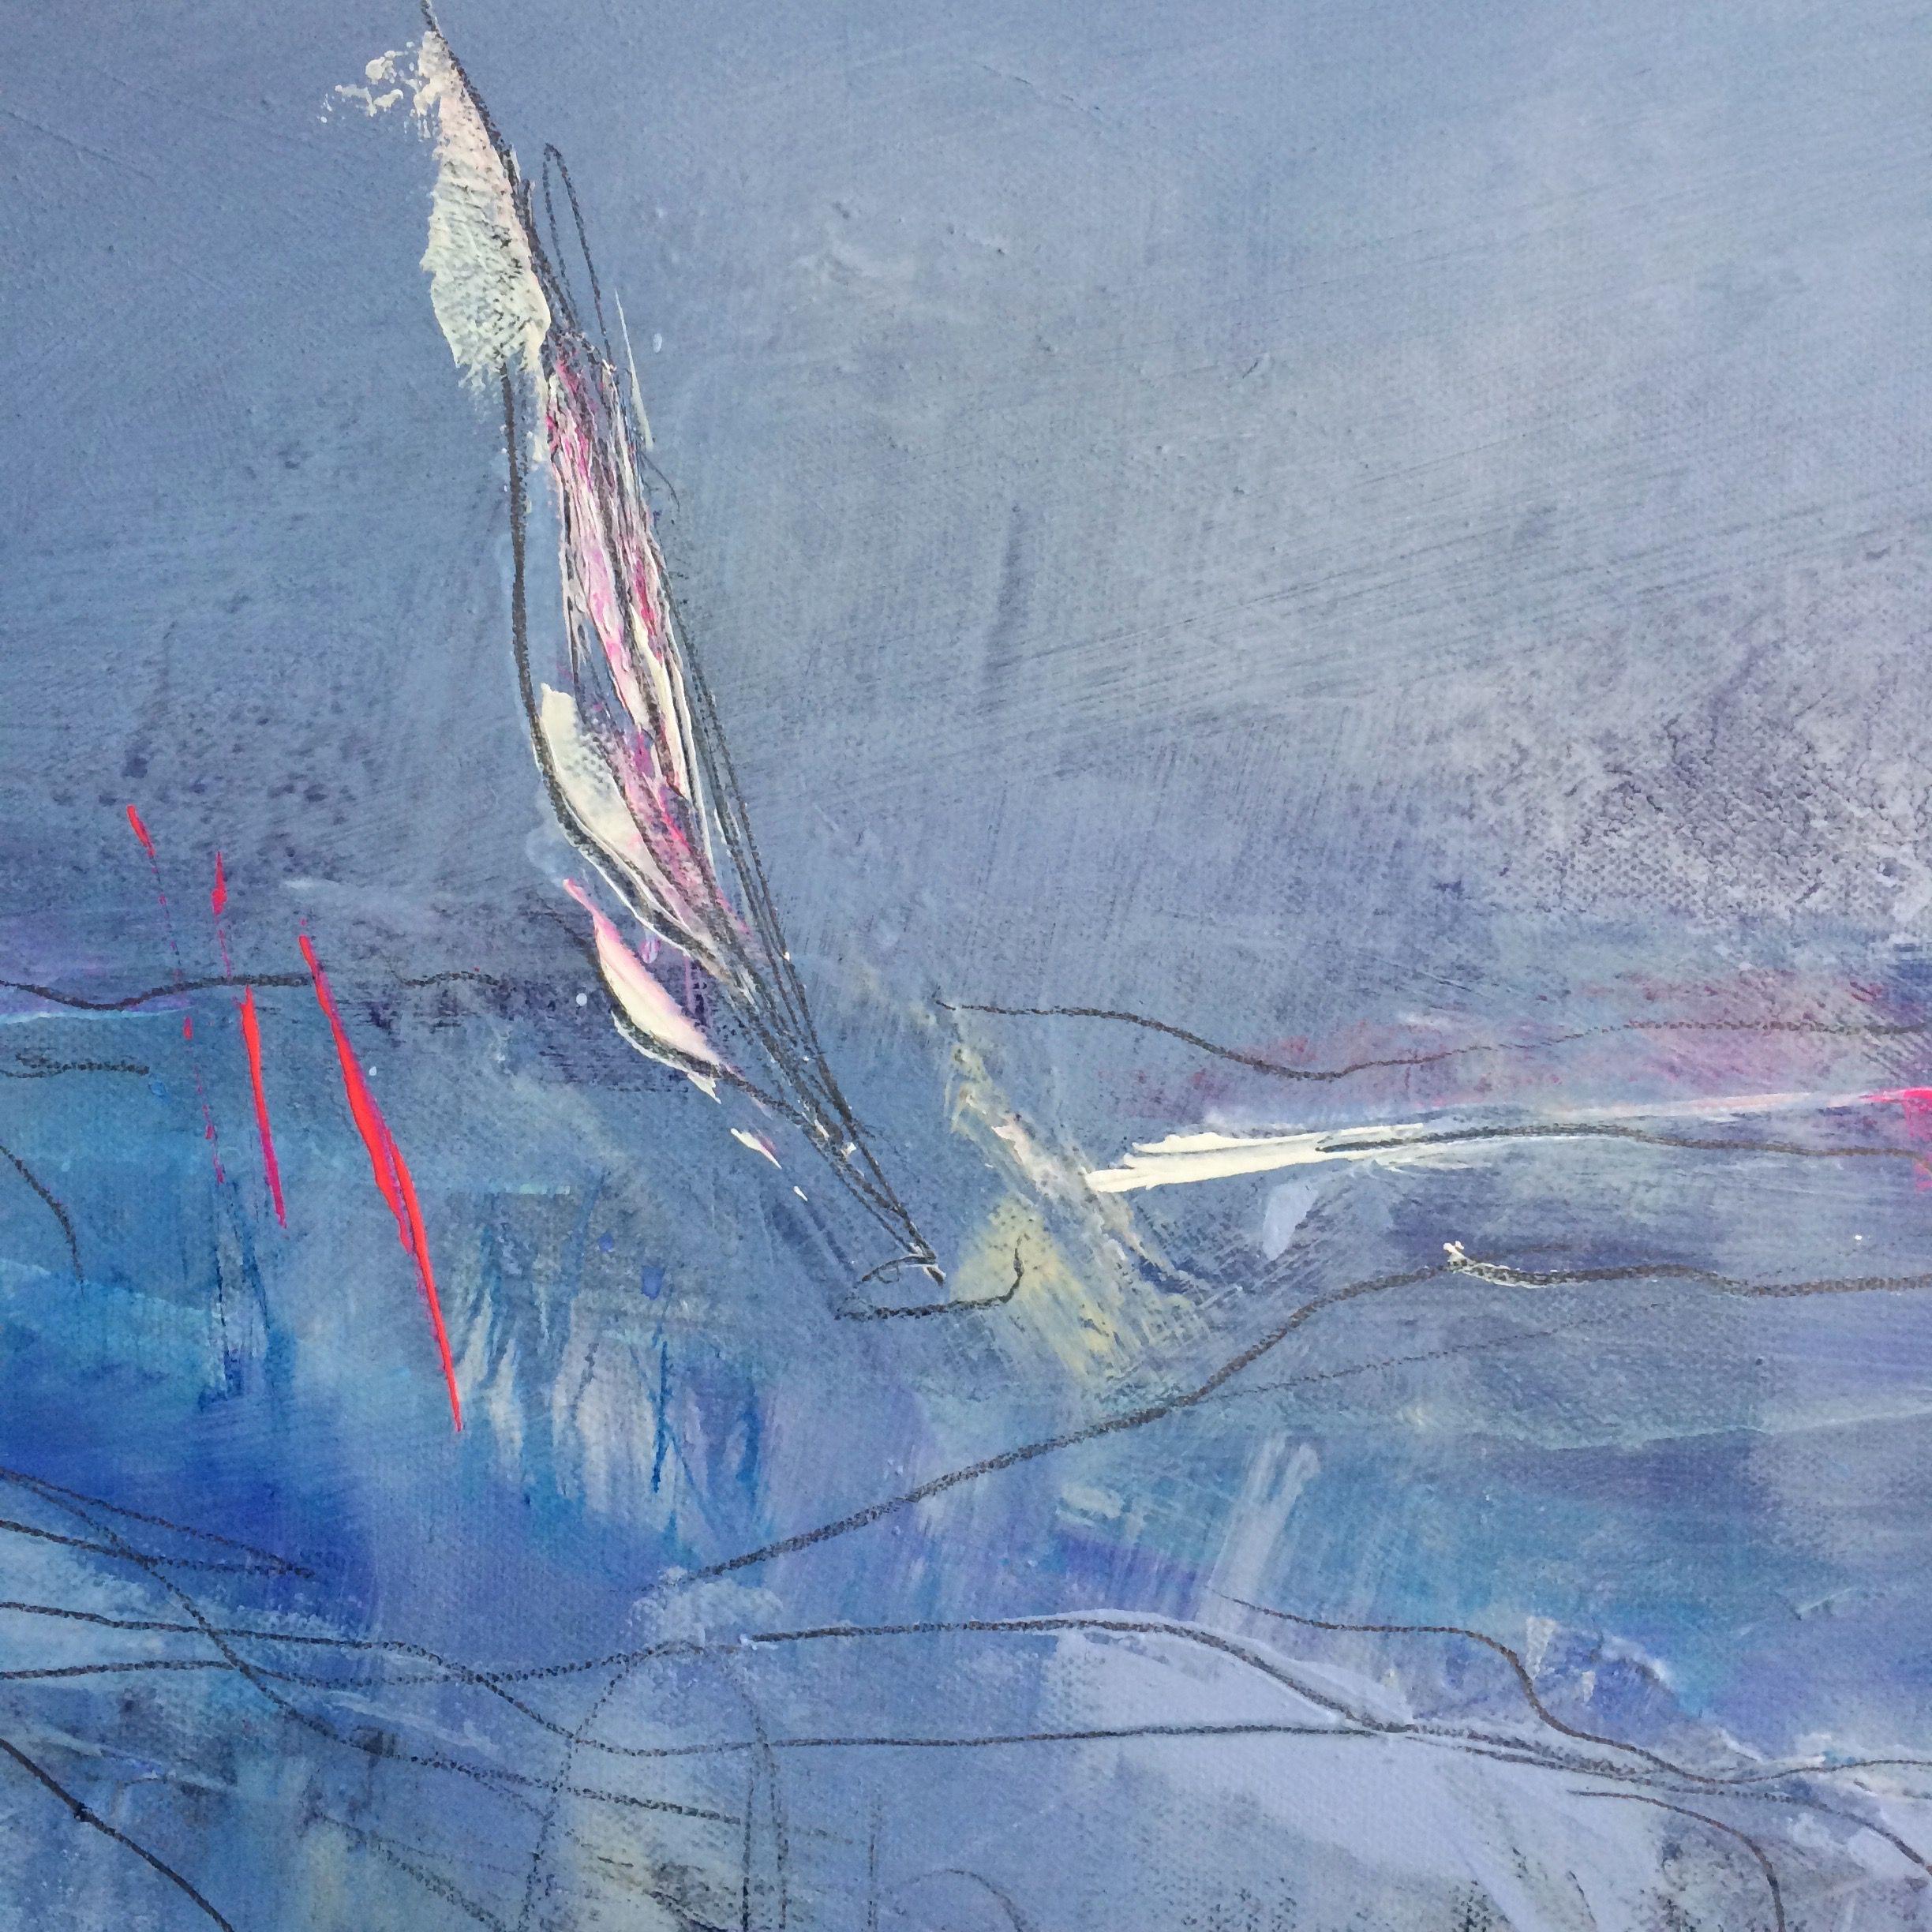 A big, expressive semi-abstract blue landscape - while being in self-isolation because of Covid19 I am dreaming more and more often of sailing away from it all...  here you can find lovely pastel blues with lots of markmaking, watertraces and traces